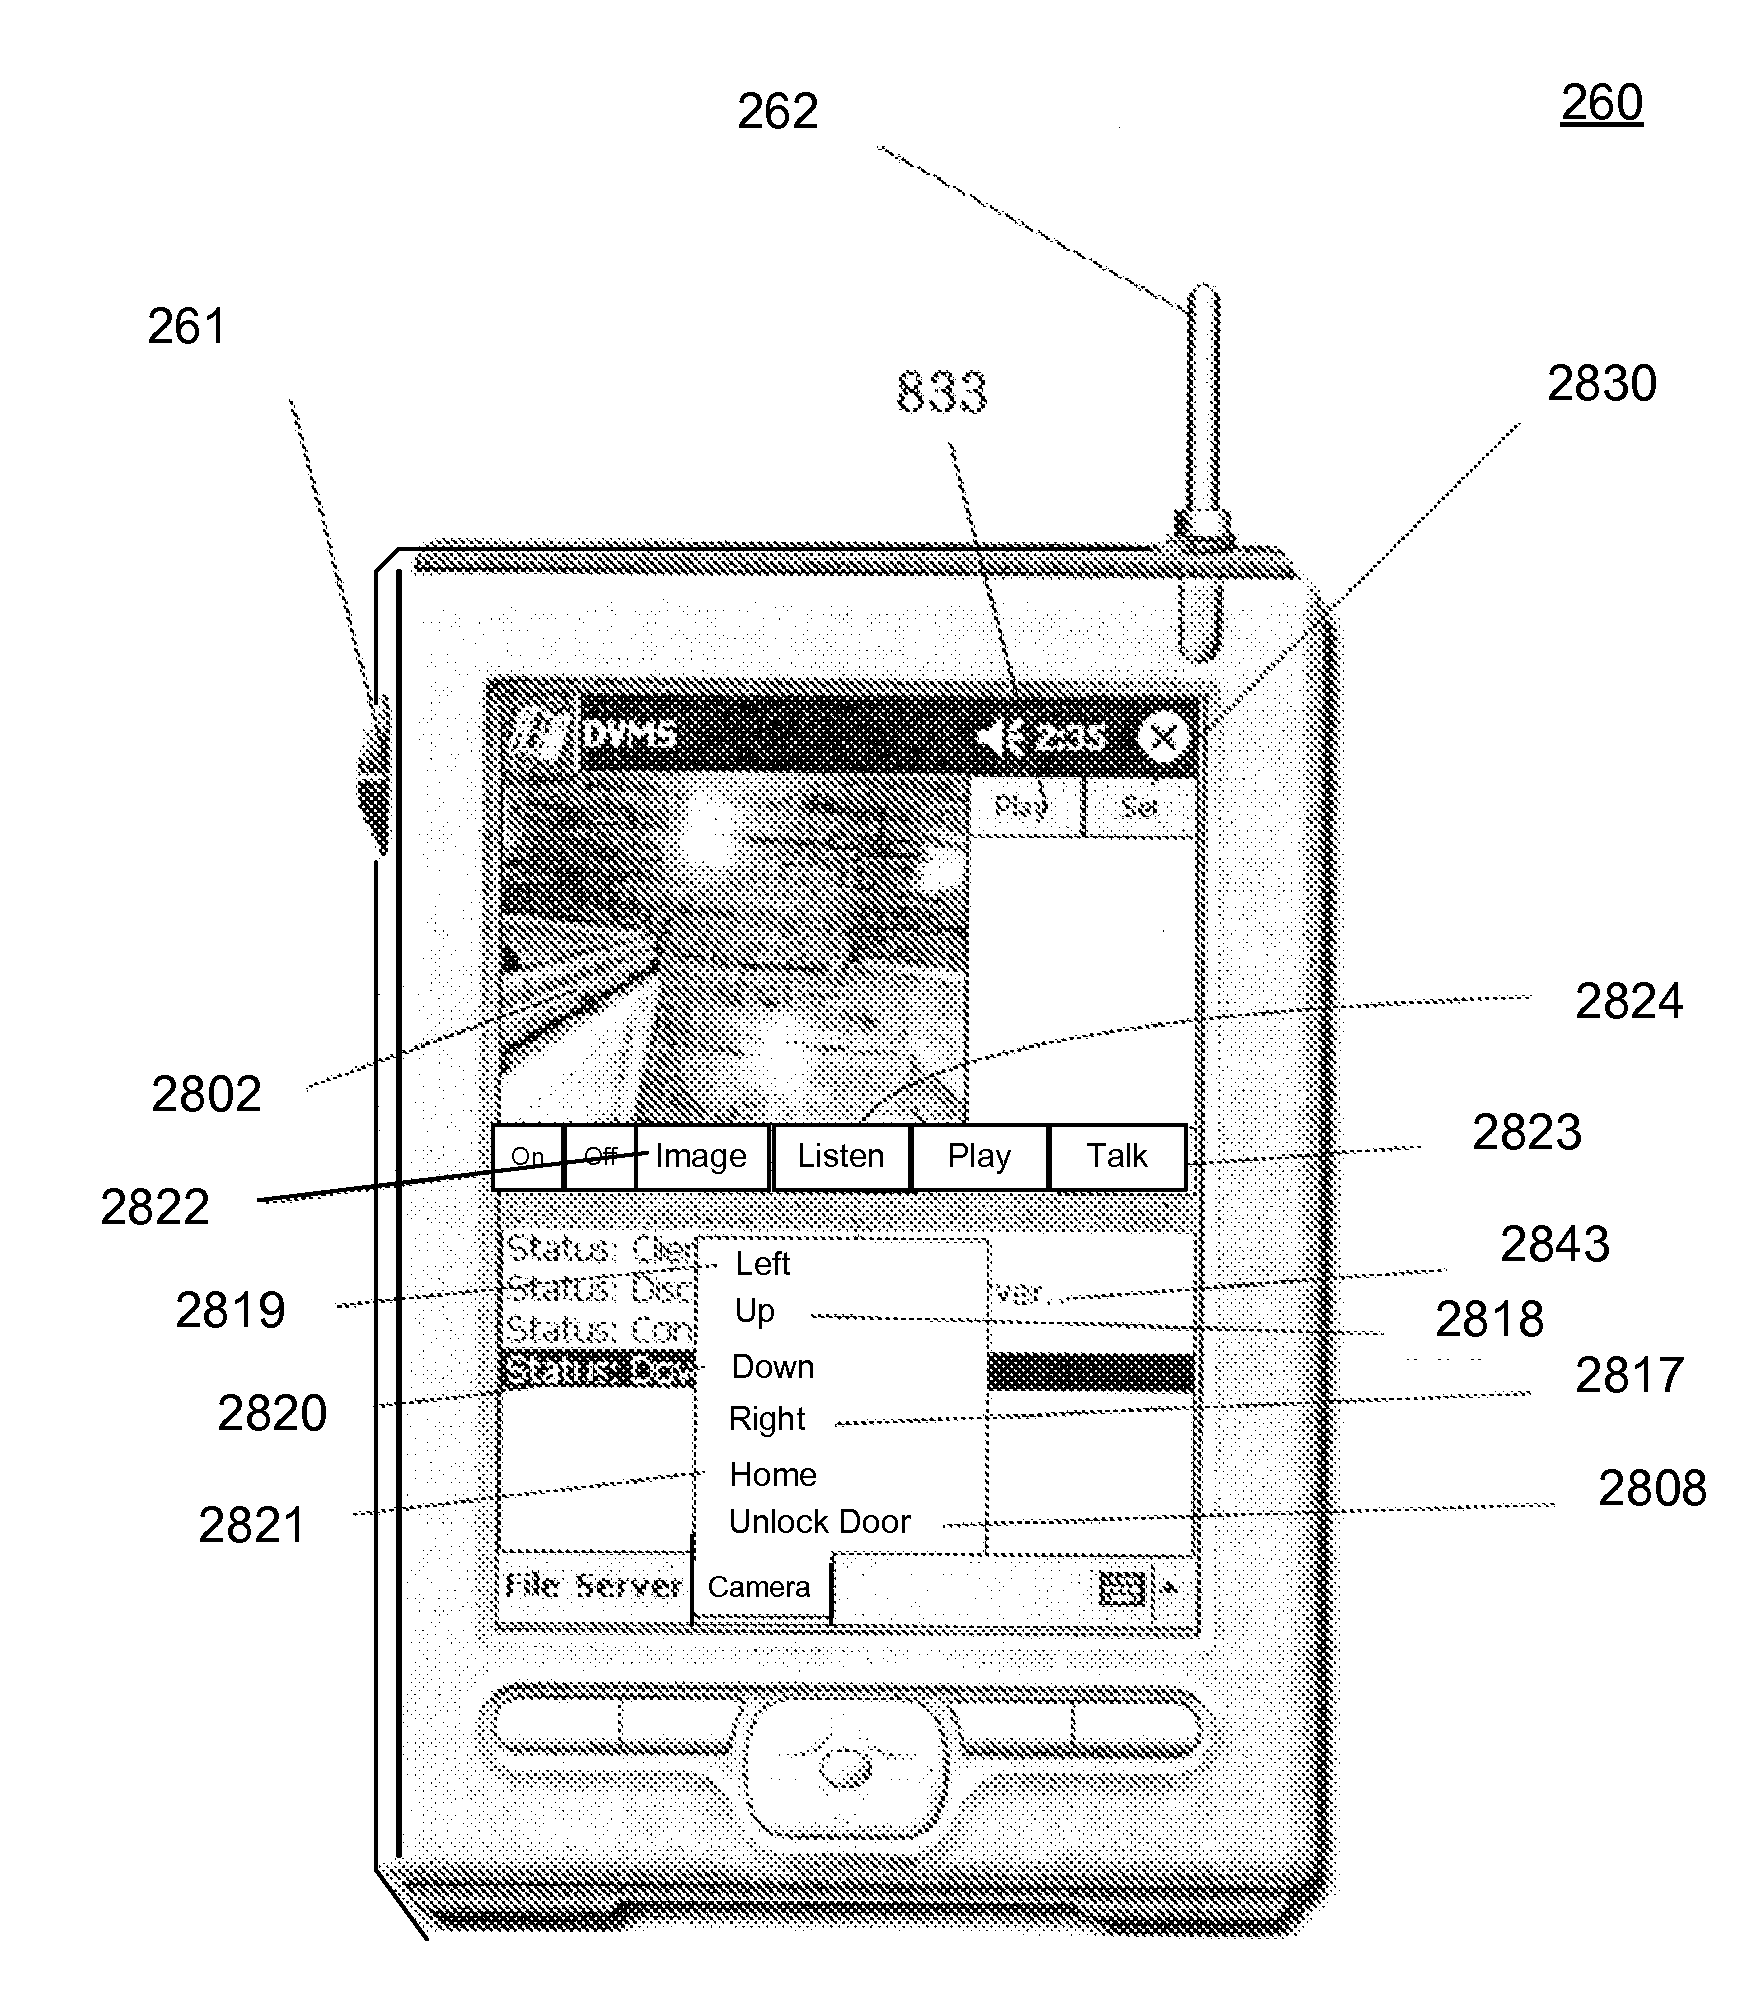 Communication and monitoring system